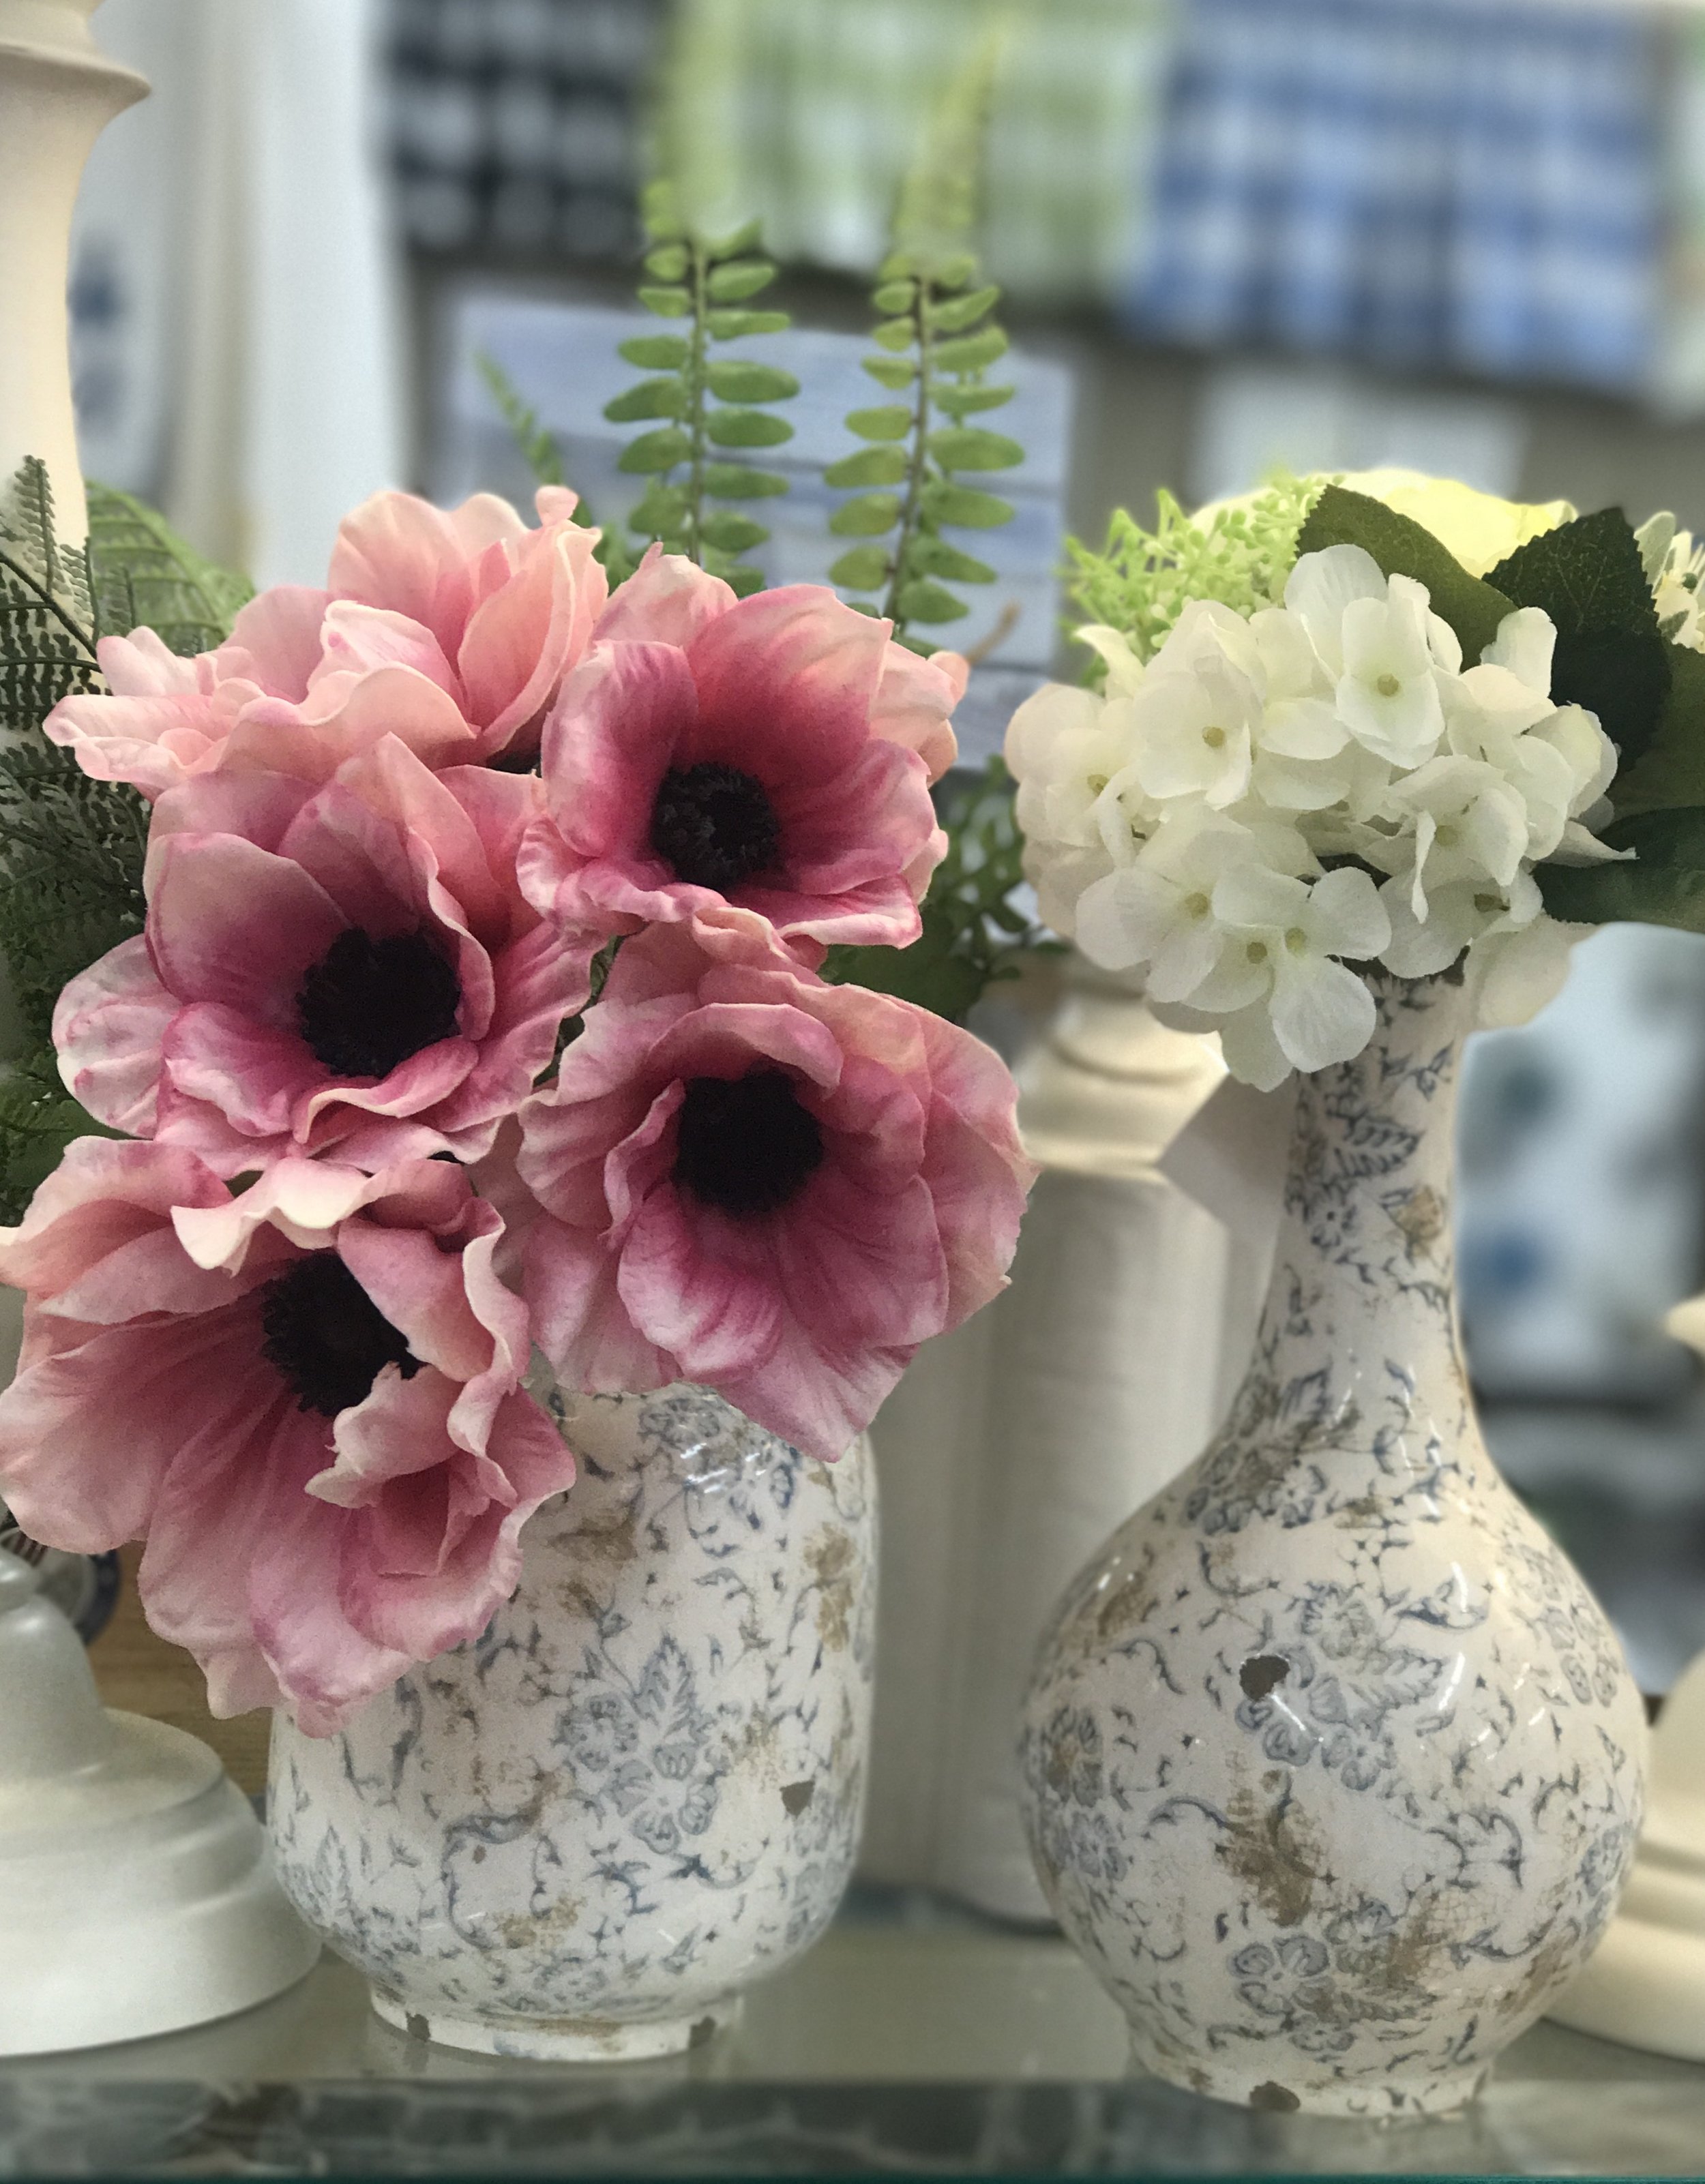 Small Grey and White Vases with Florals